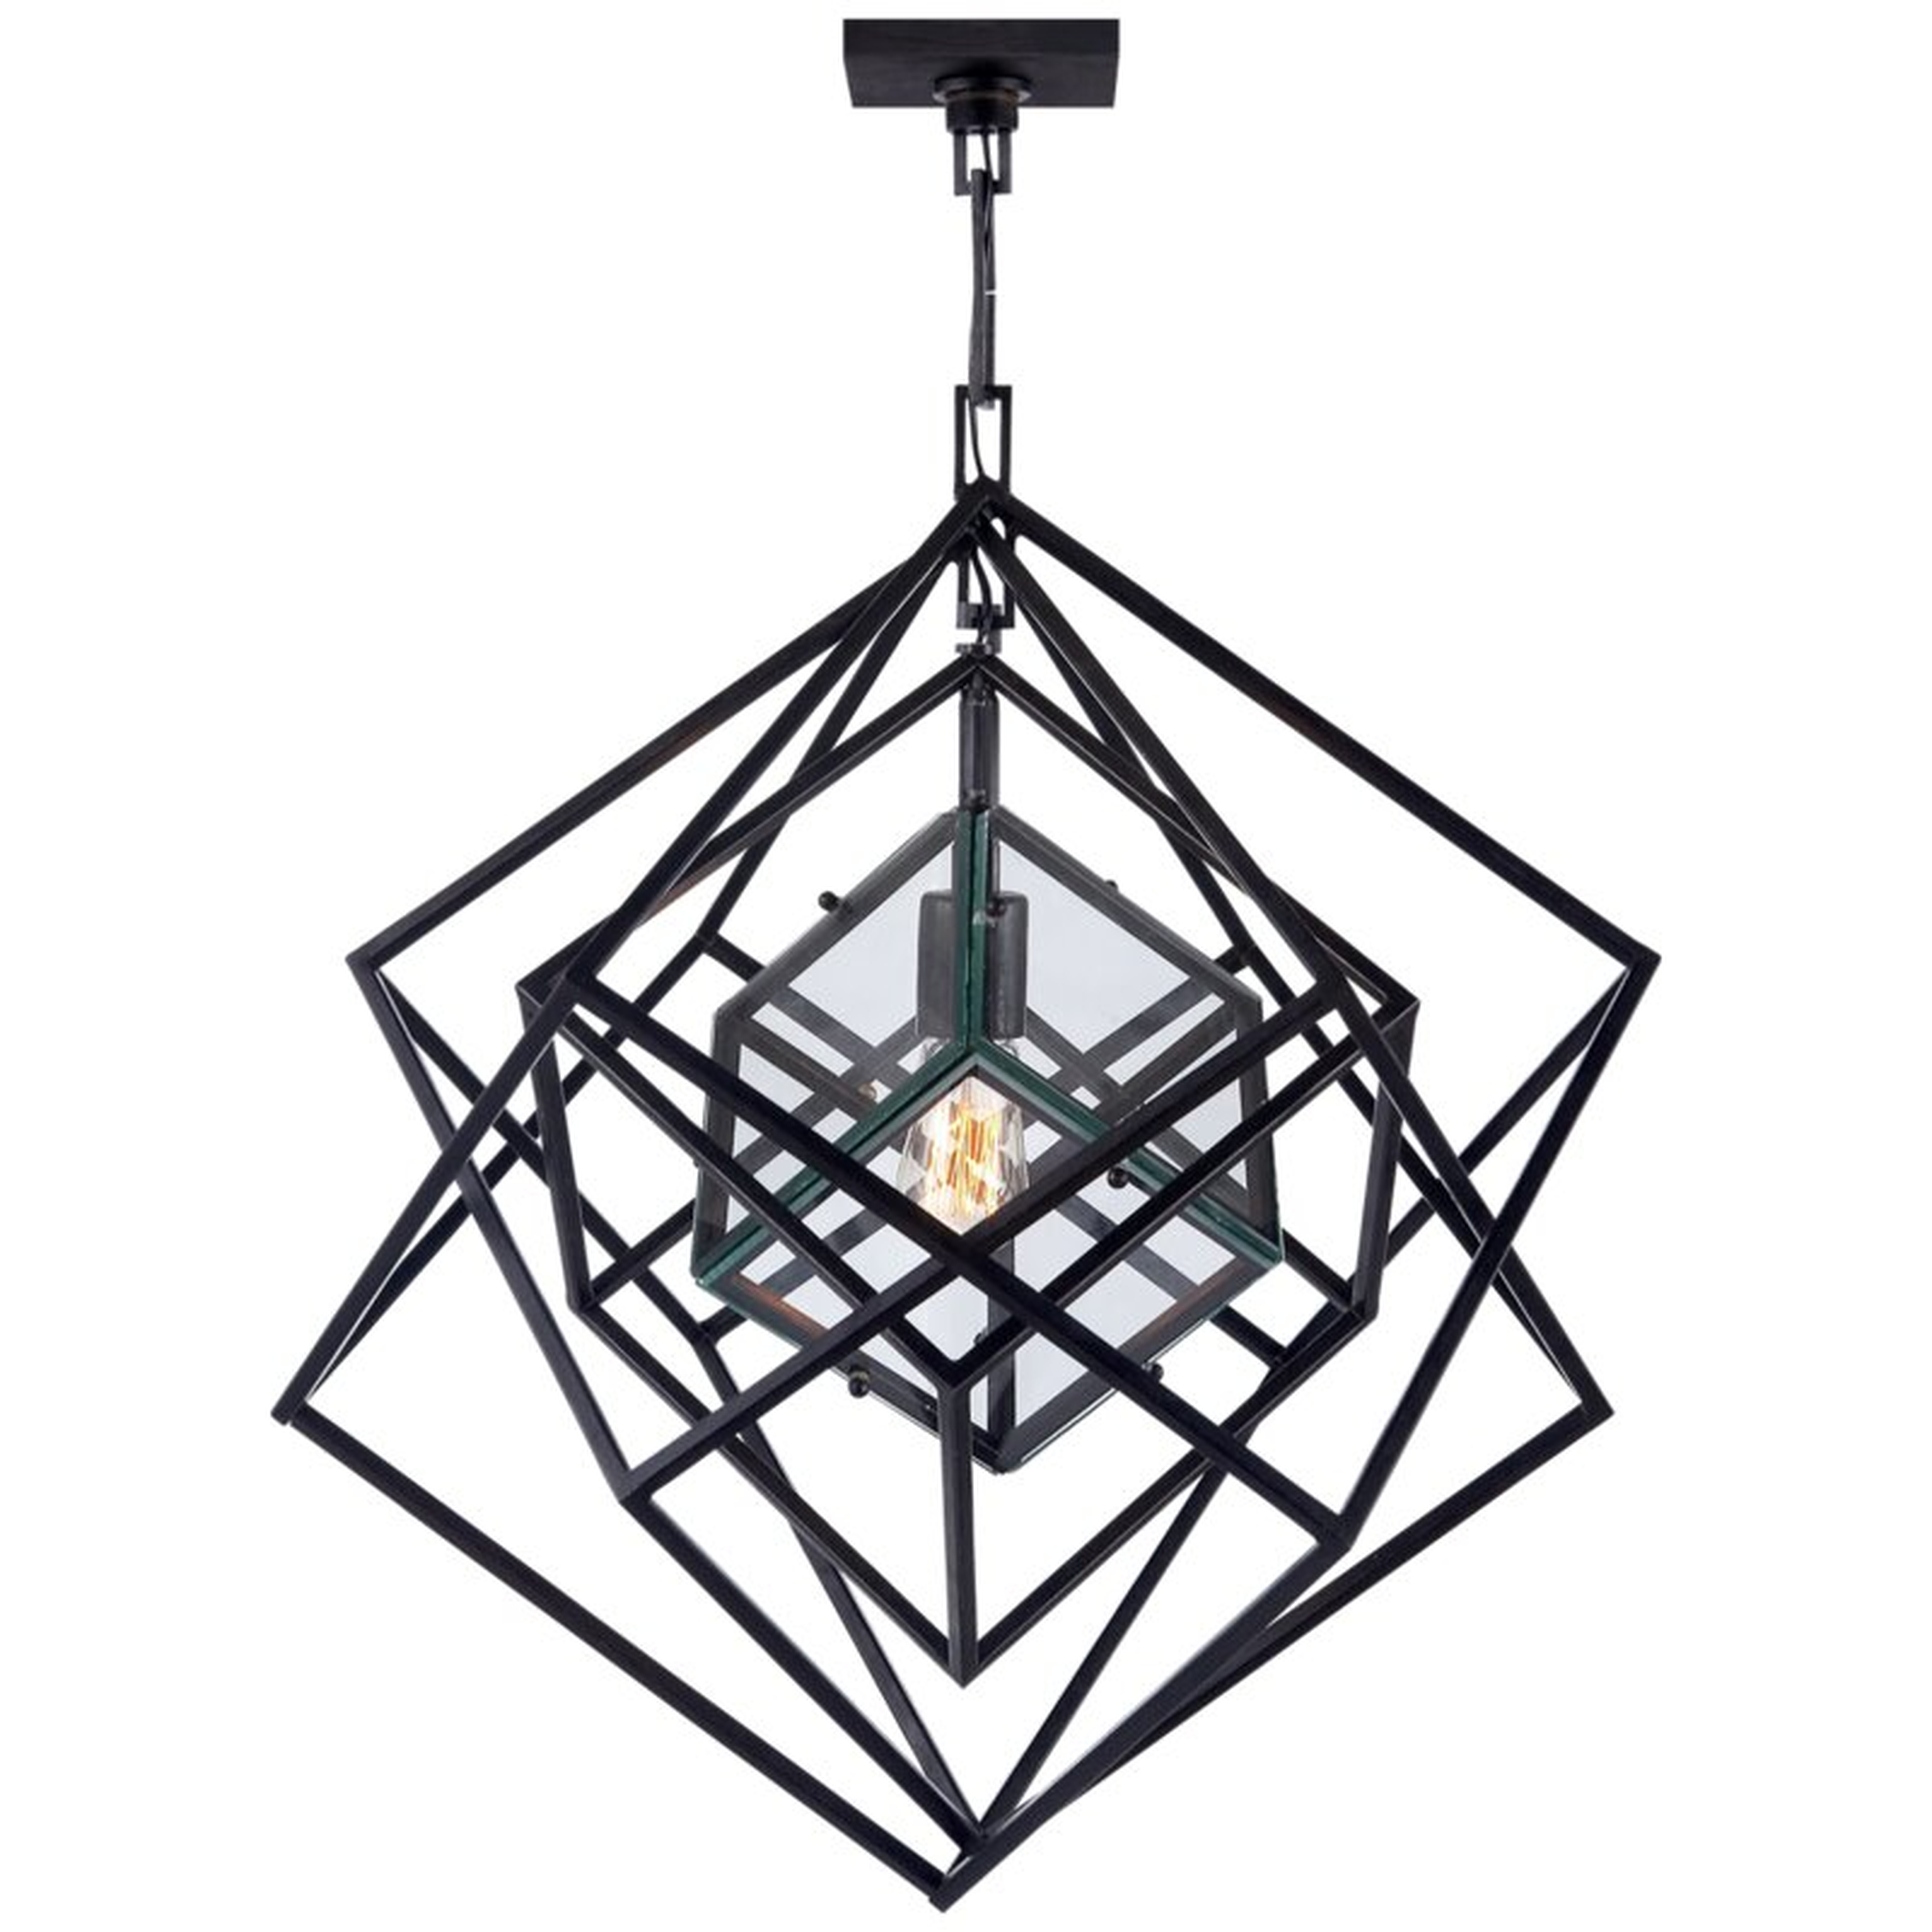 Visual Comfort Signature Kelly Wearstler Cubist Small Chandelier - Perigold